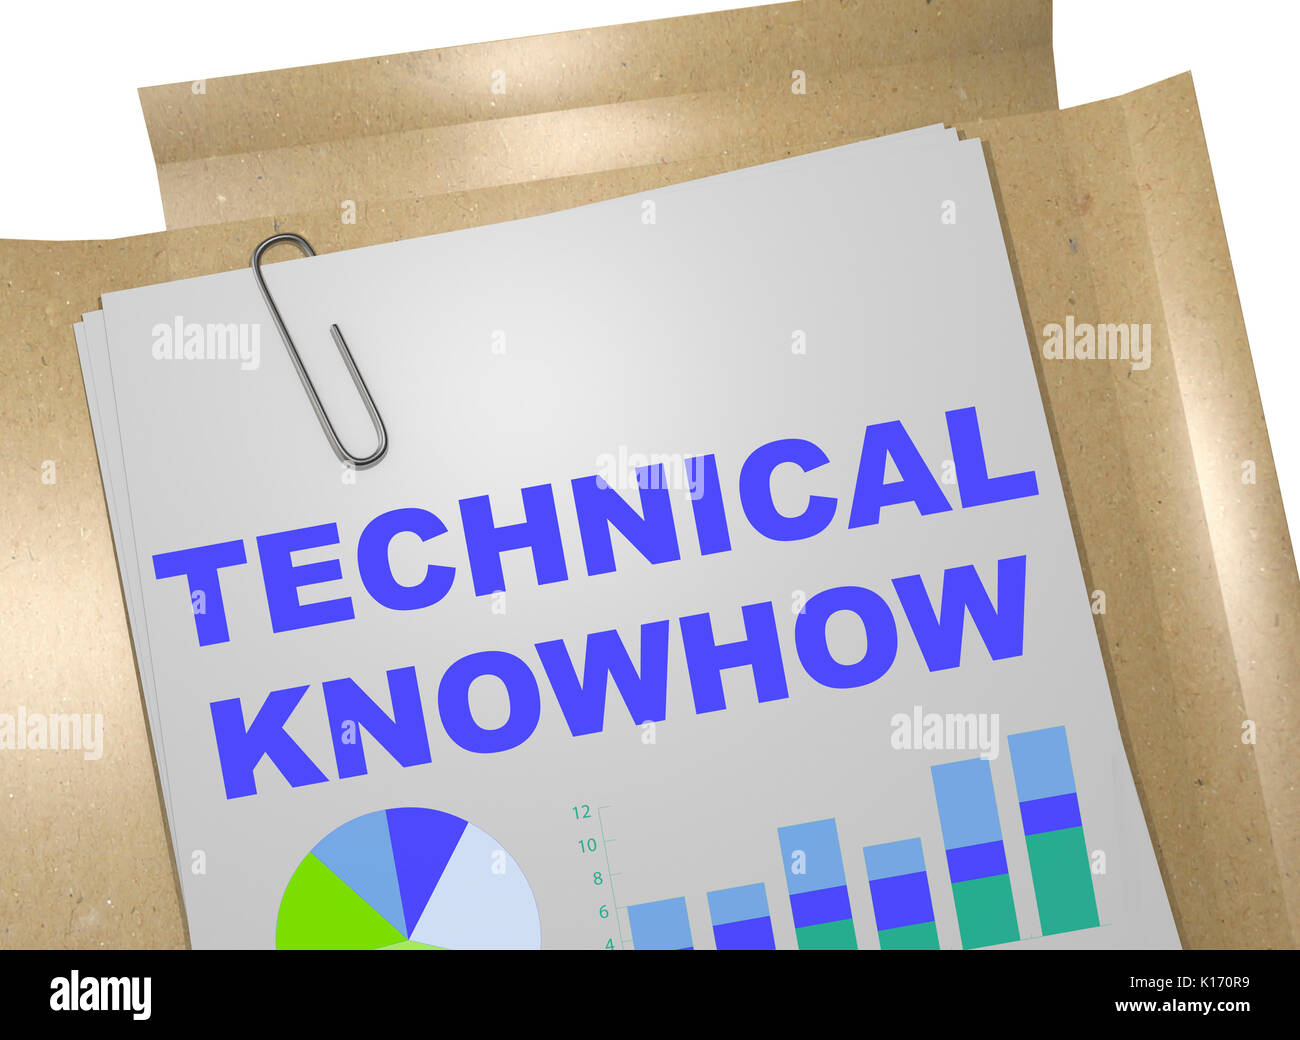 3D illustration of 'TECHNICAL KNOWHOW' title on business document Stock Photo